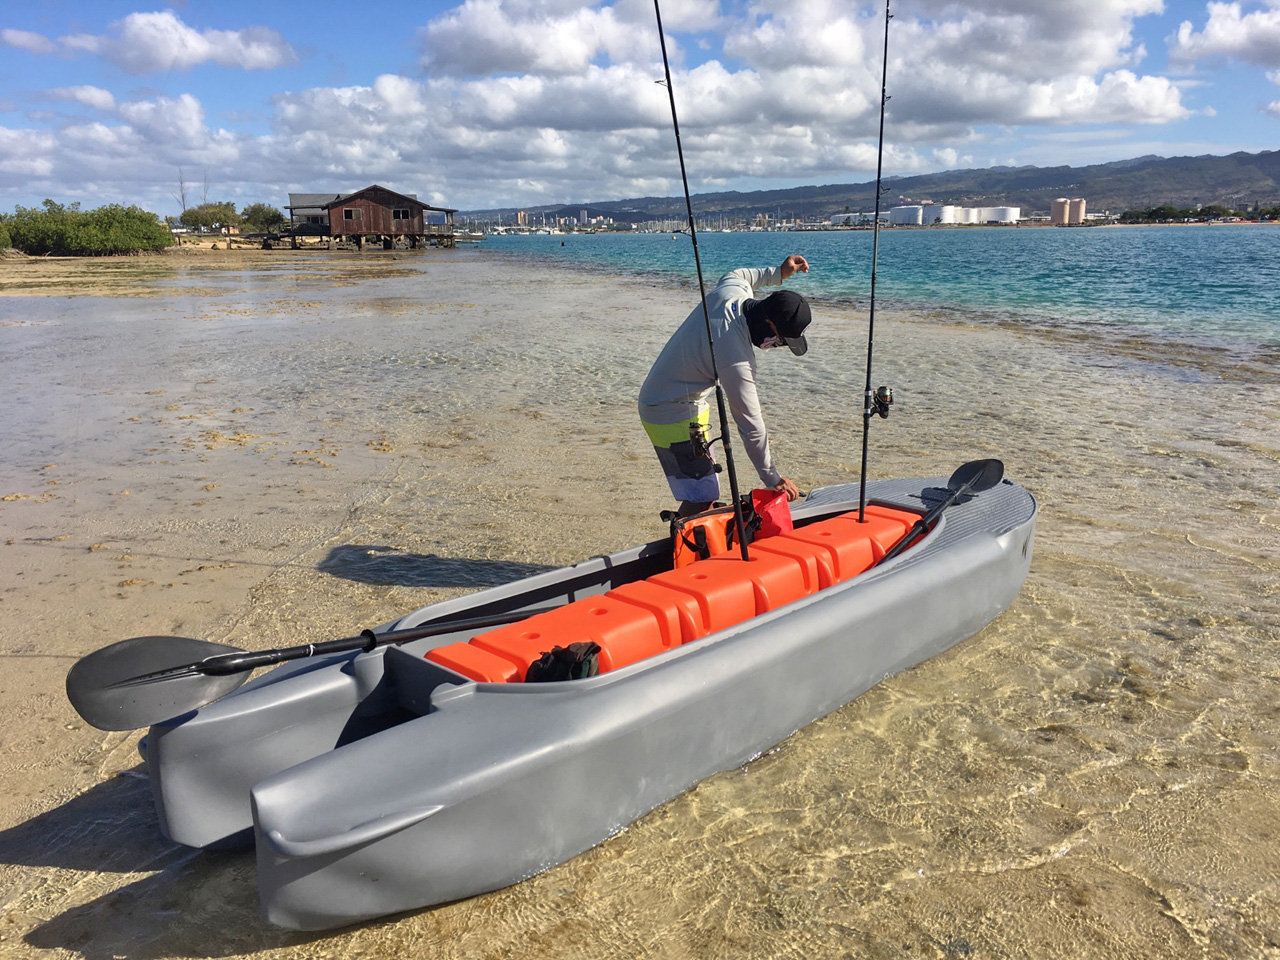 First outing in our Wavewalk S4 tandem fishing kayak